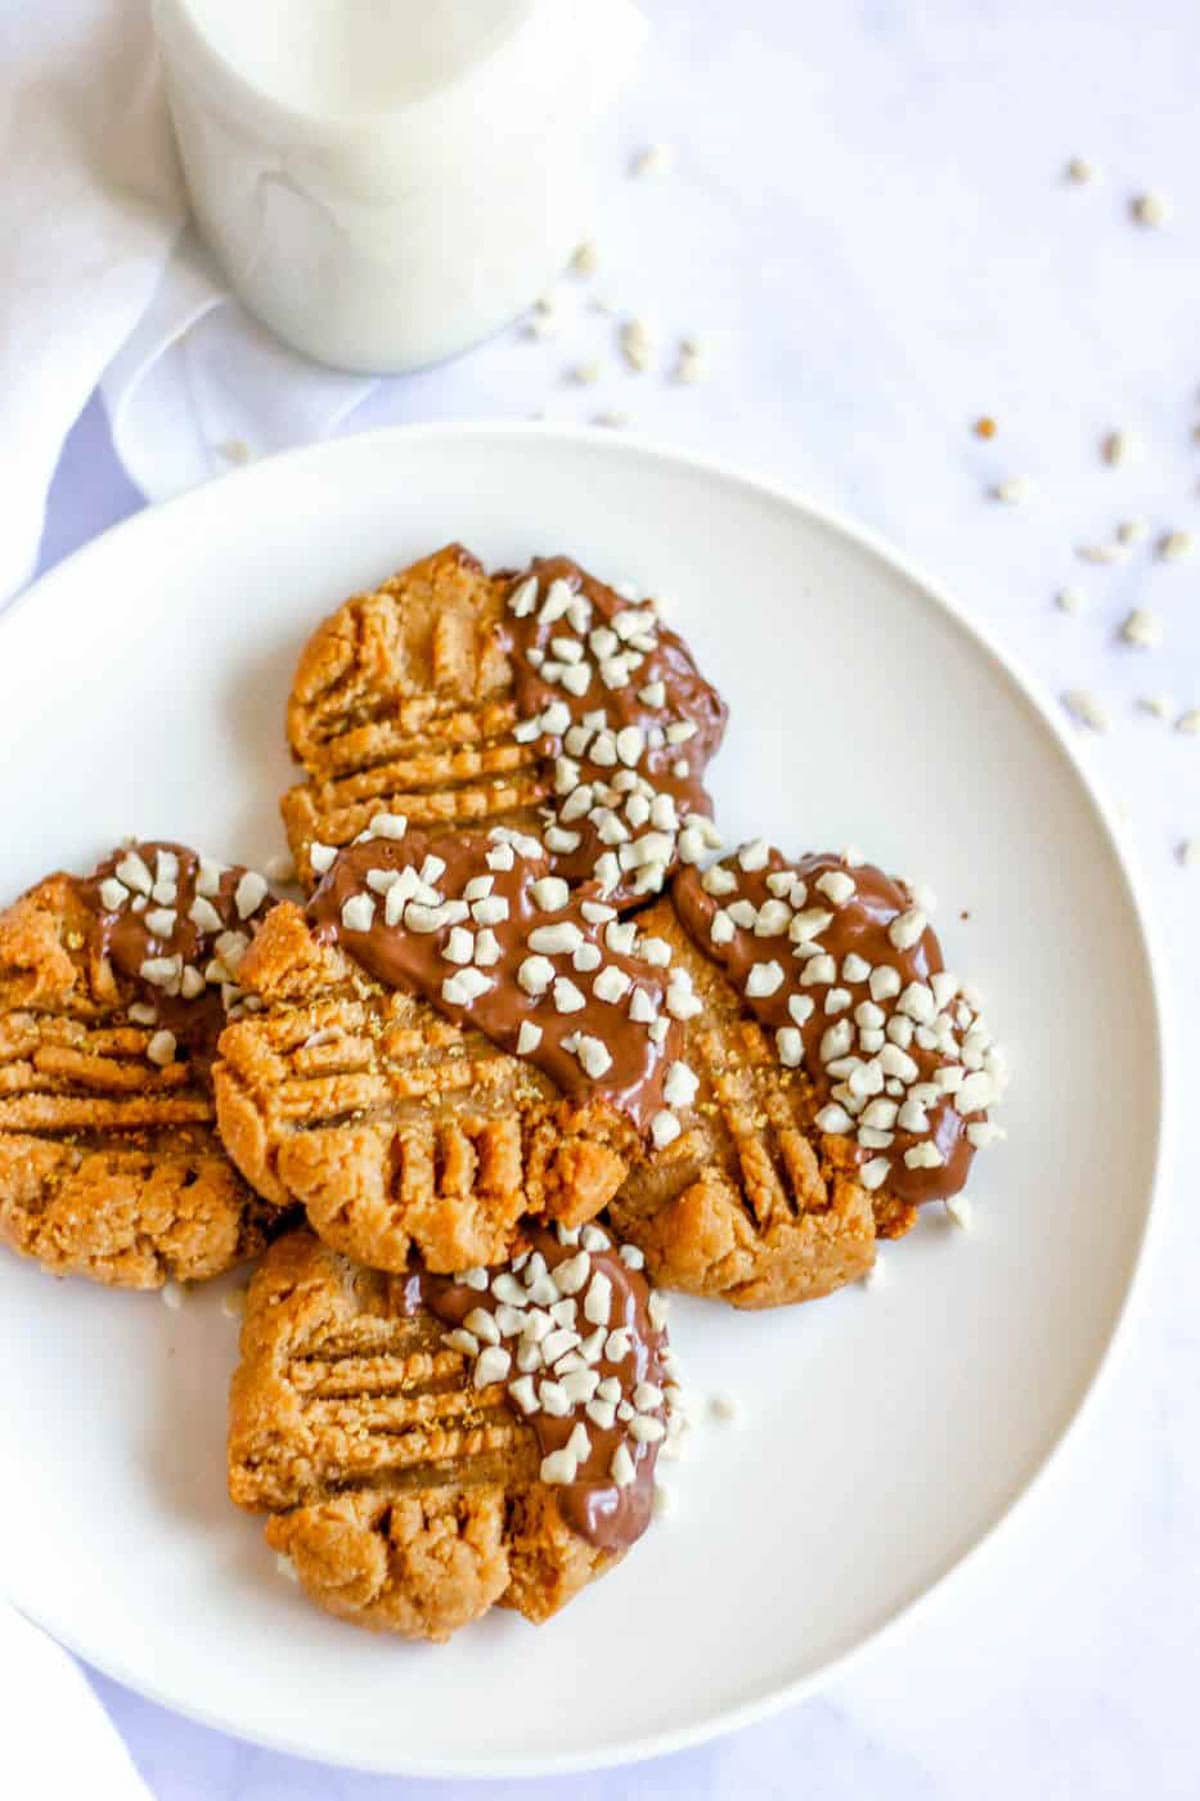 Almond flour peanut butter cookies on a white plate.